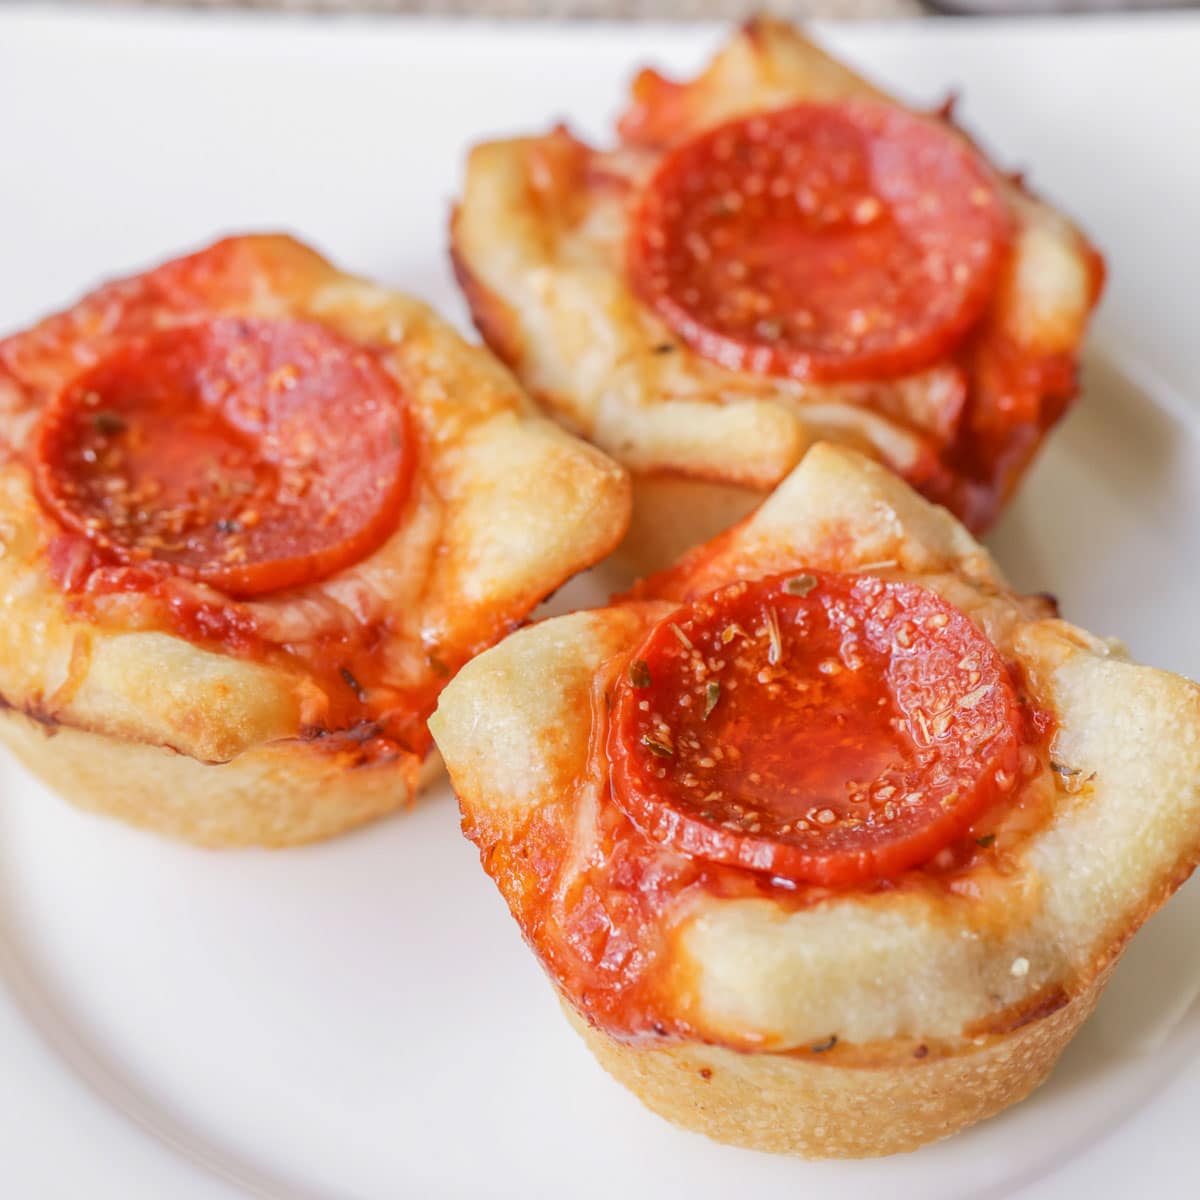 Quick dinner ideas - mini deep dish pizzas topped with pepperoni.